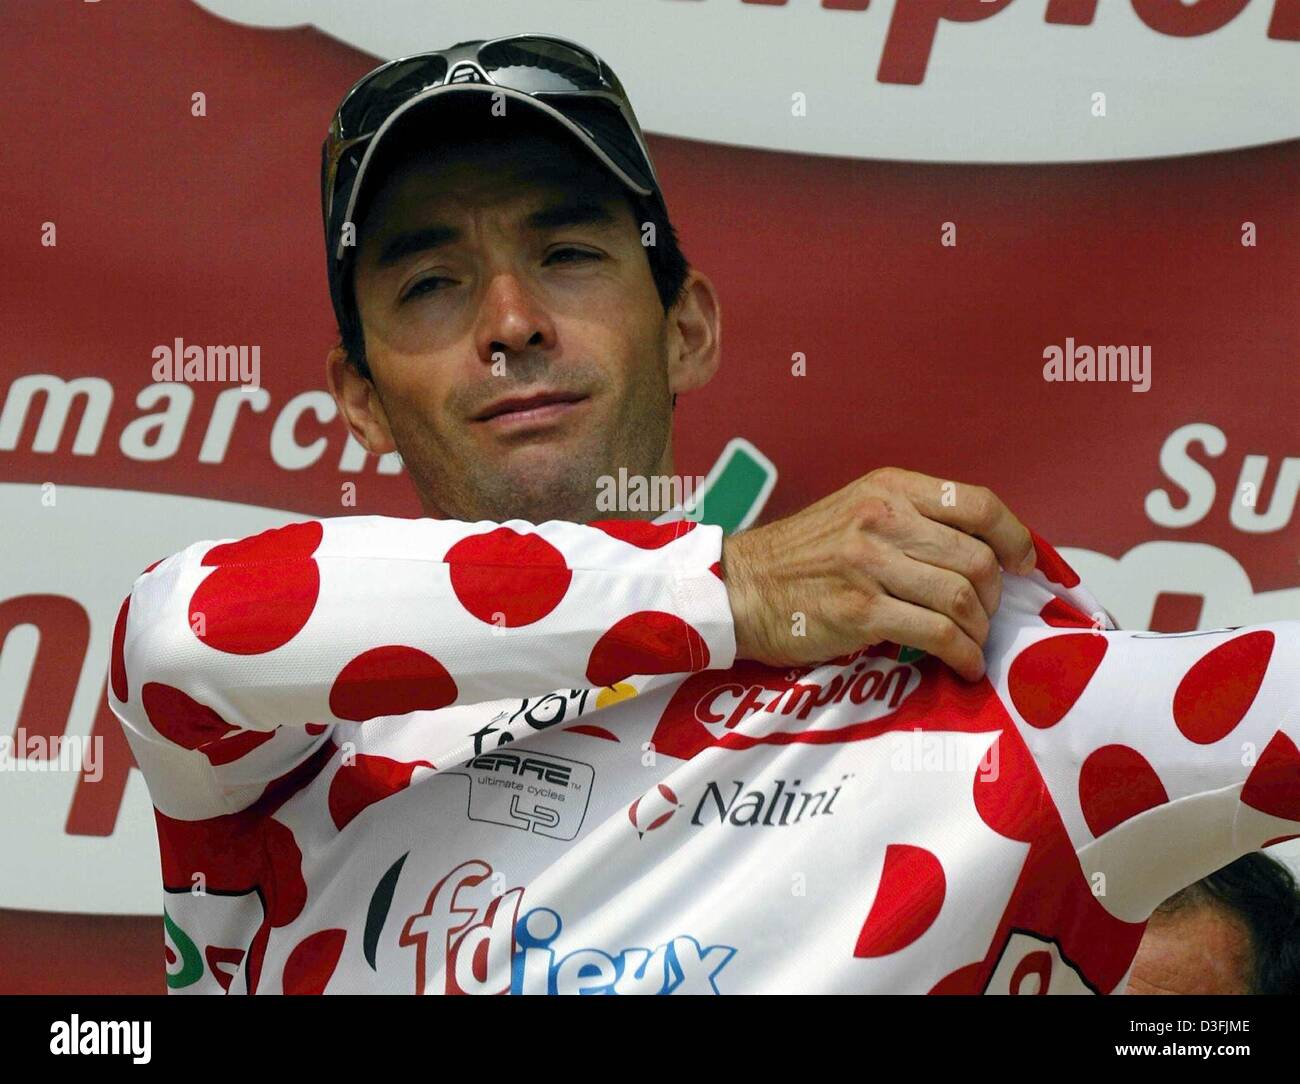 (dpa) - French cyclist Christophe Mengin of the team FDJeux puts on the red and white polka-dotted jersey of the best climber after the third stage of the Tour de France cycling race, in Saint Dizier, France, 8 July 2003. The third stage led from Charleville-Mezieres to Saint Dizier over a distance of 167.5 km. Stock Photo